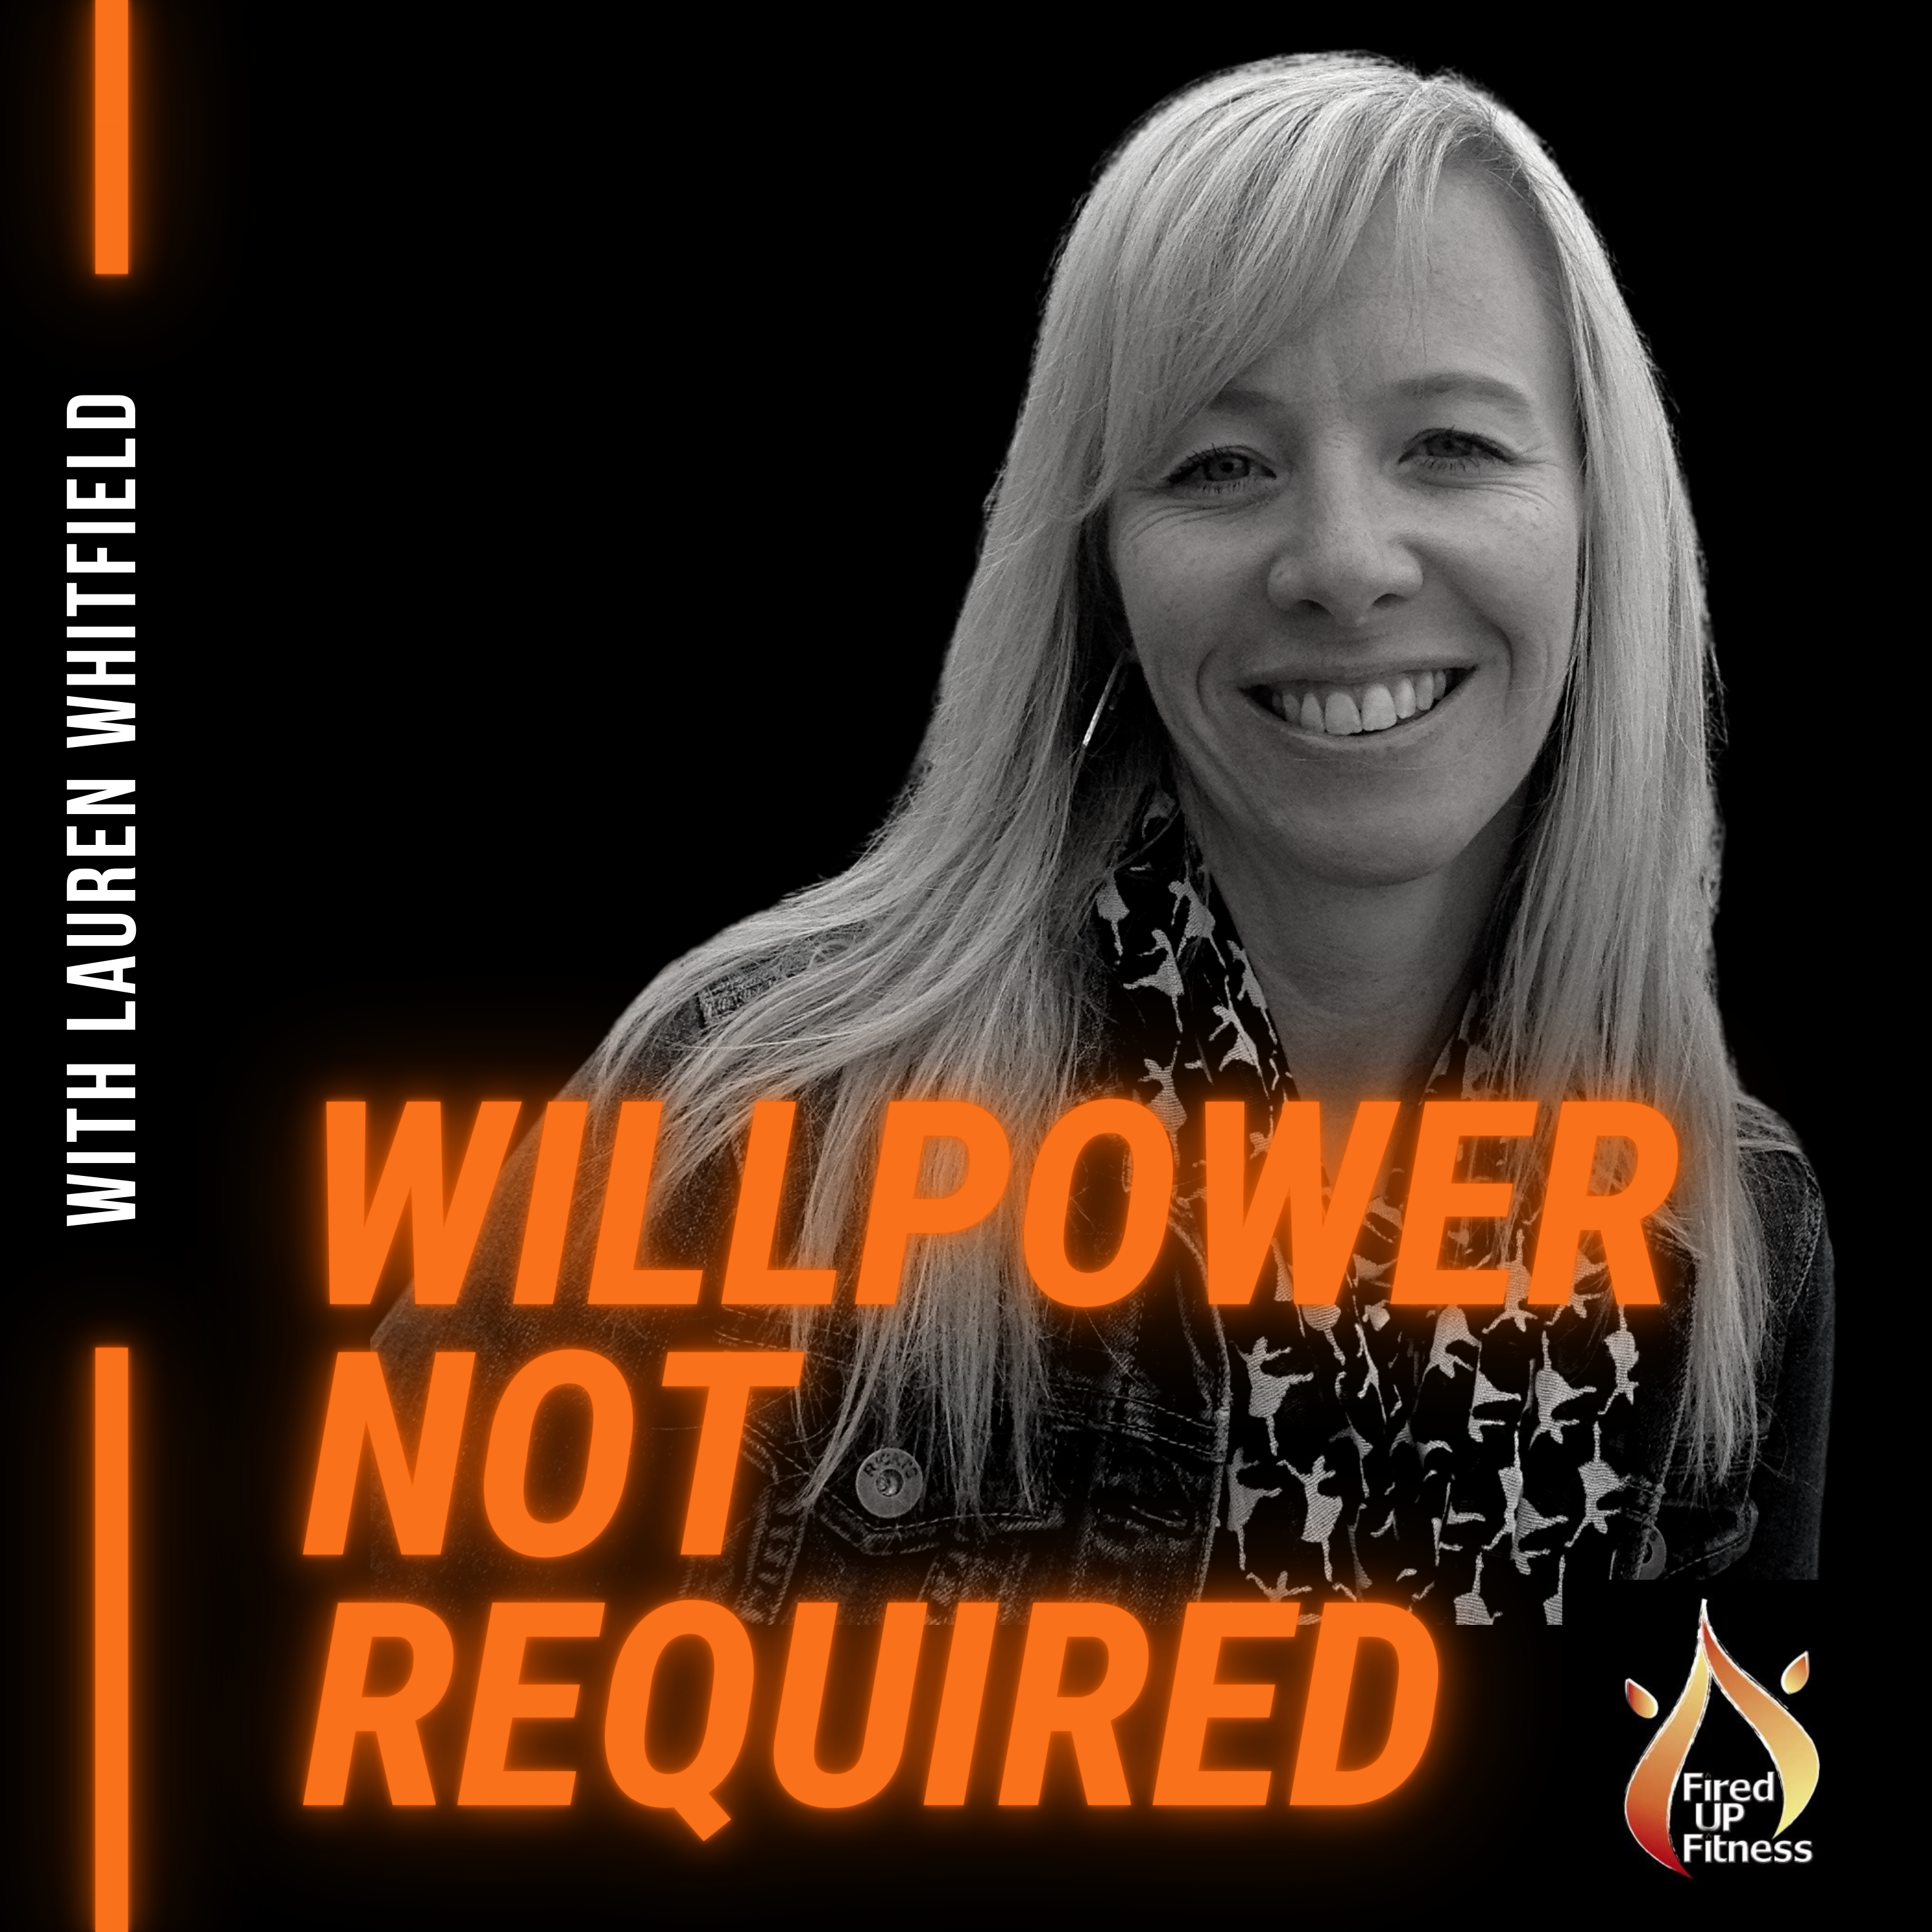 Willpower not required health & wellness podcast